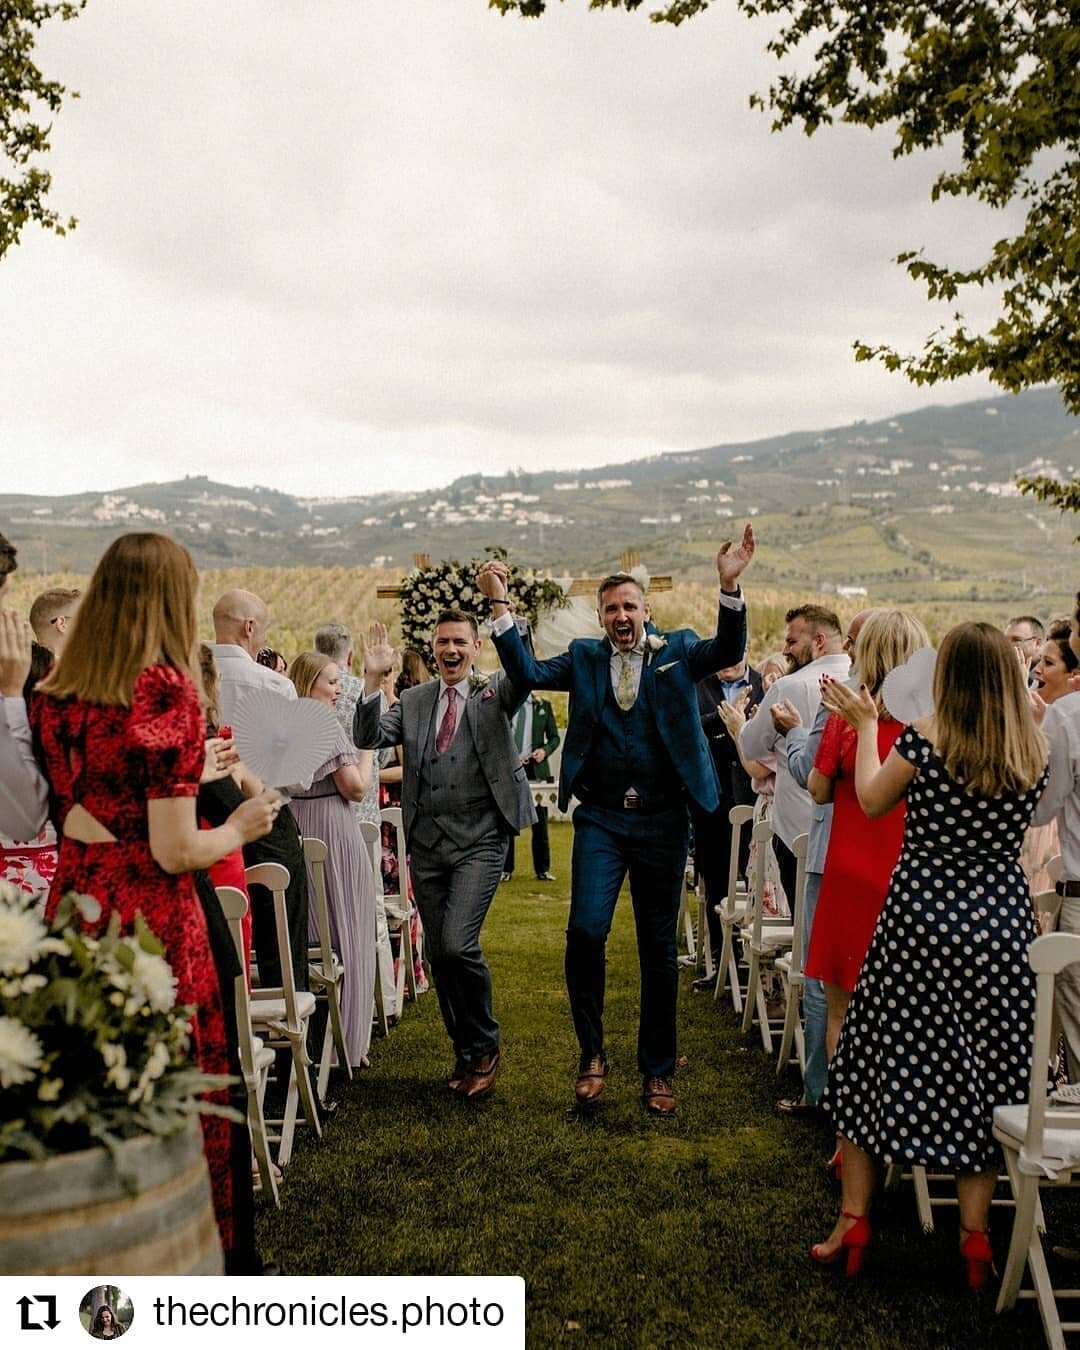 Repost @thechronicles.photo

Quinta Da Pacheca

&quot;The funniest moment on our wedding day was our friends running onto the dance floor wearing 'Sonia from Eastenders' masks with plastic trumpets! It's long been a running joke with us, but never th